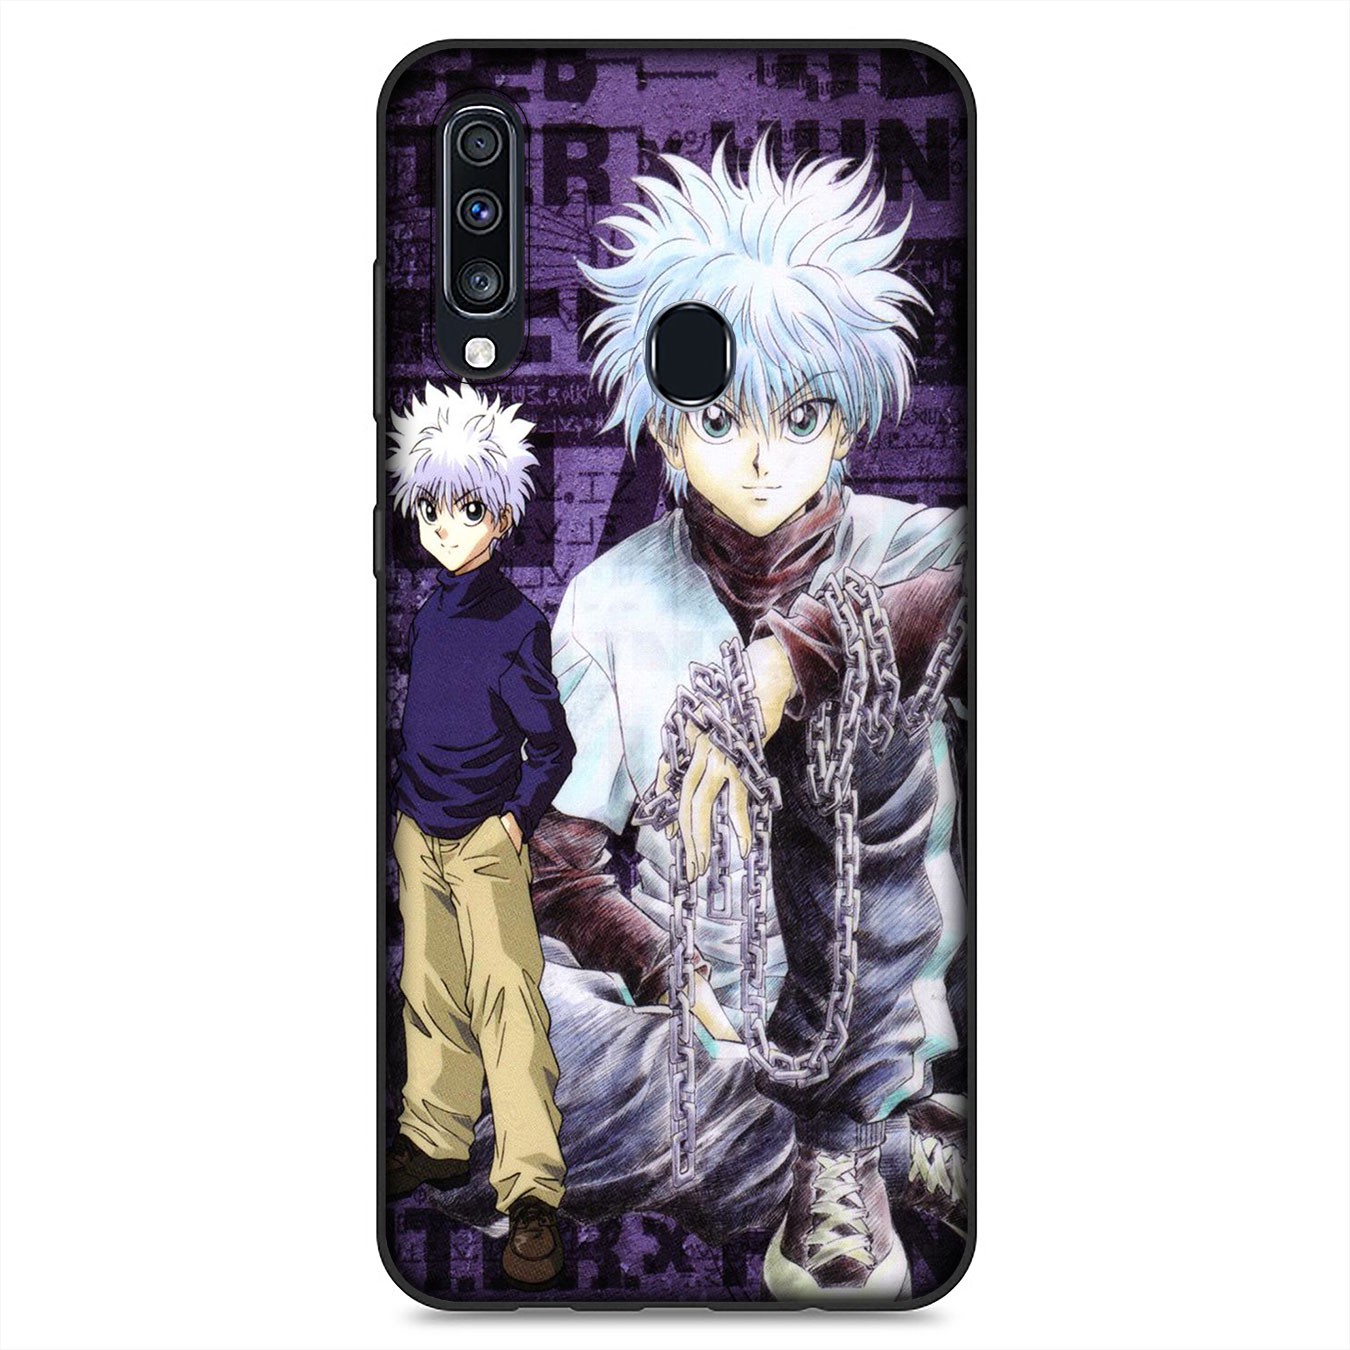 Huawei P30 Pro Lite Y6 Y7 Y9 Prime 2019 2018 Y9Prime Casing Soft Silicone Phone Case GON FREECSS Hunter x Hunter Cover